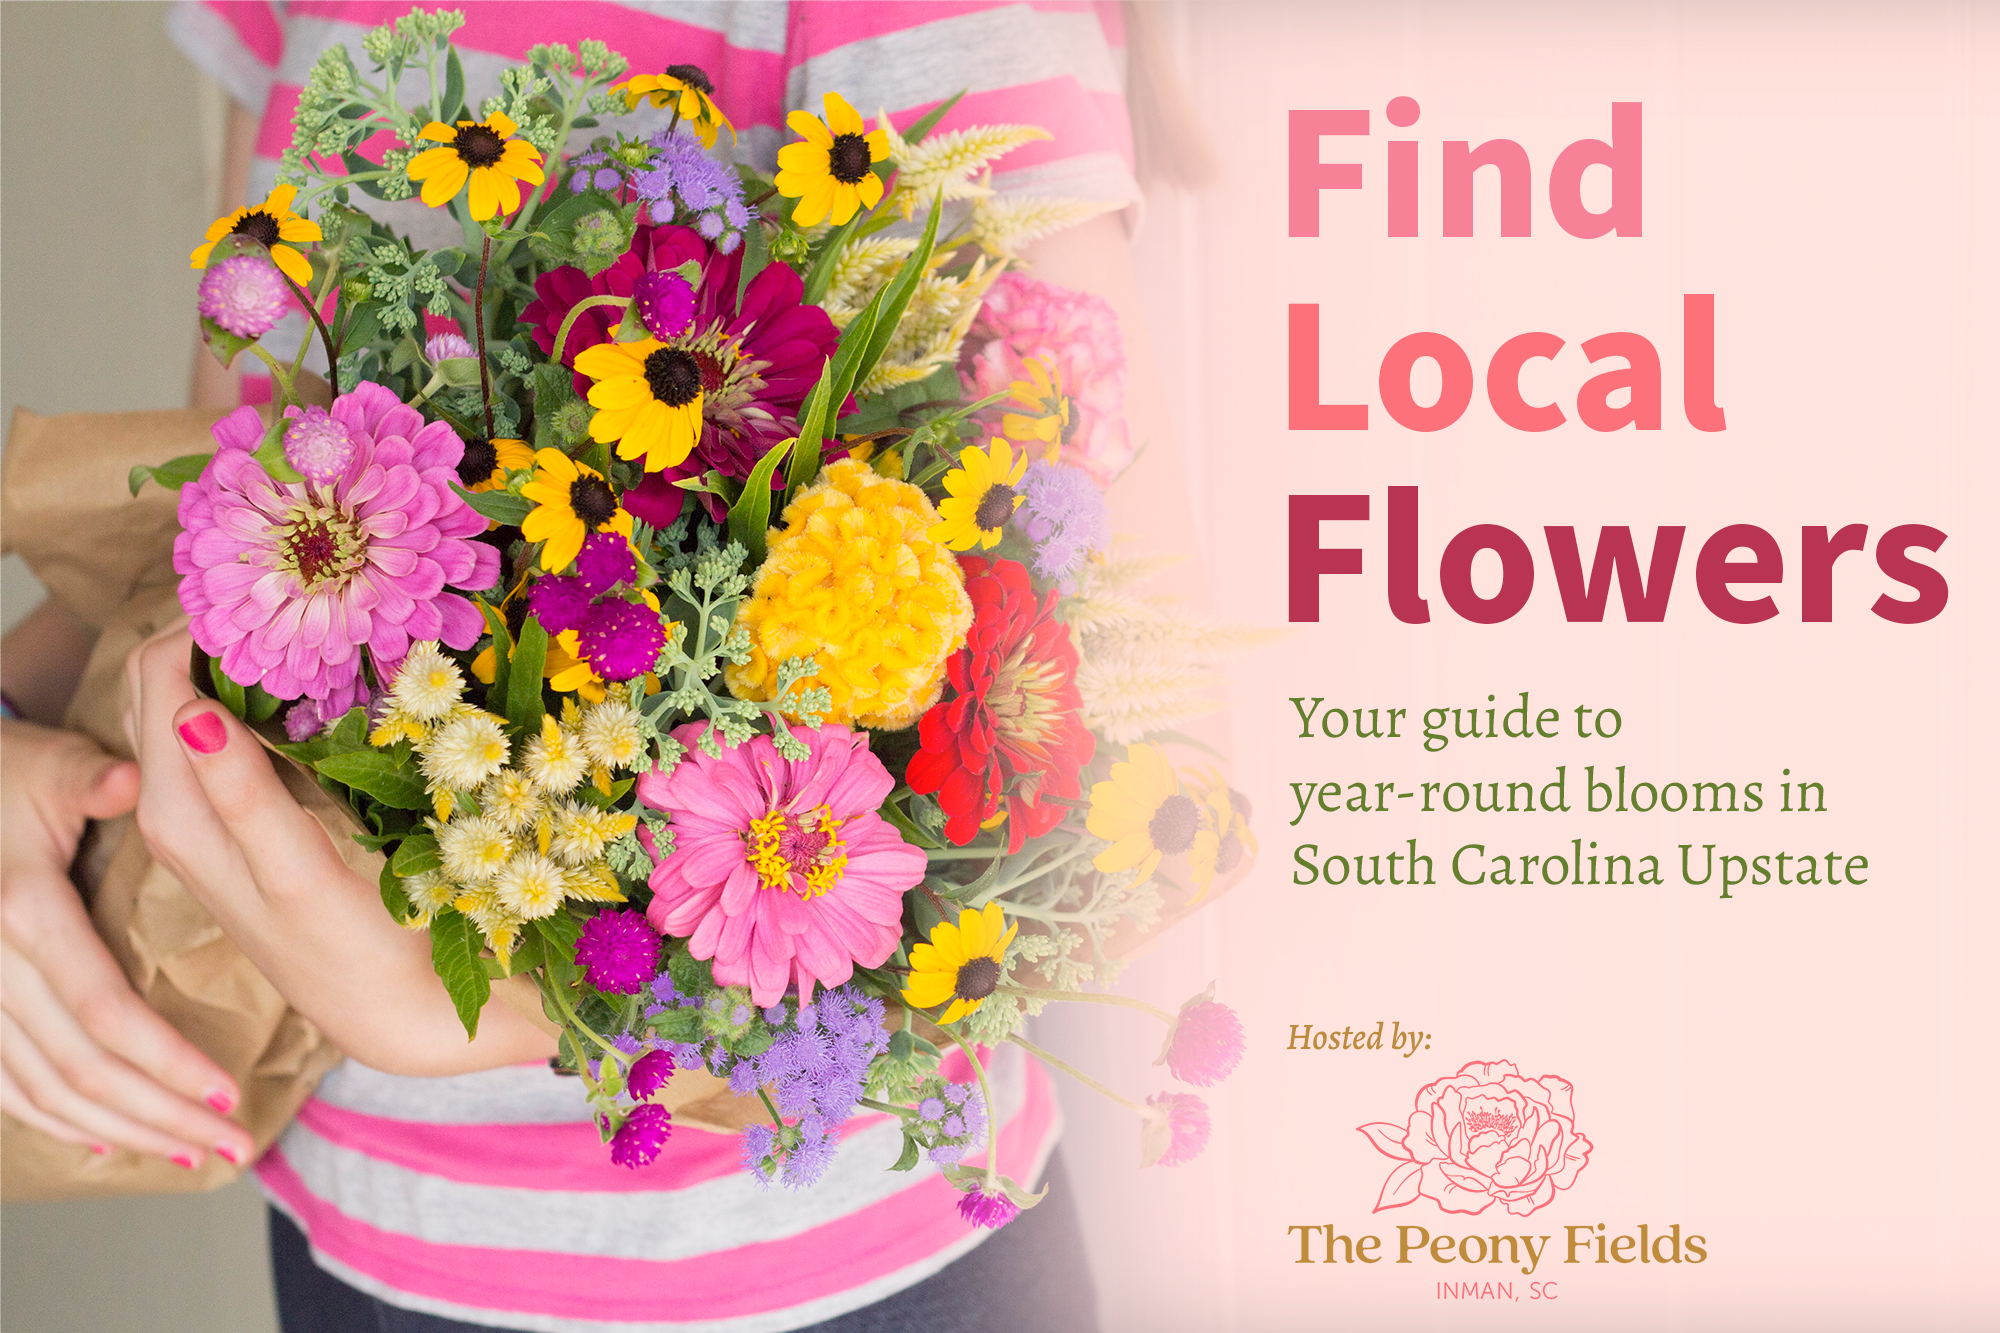 Find Local flowers Throughout the Year in the South Carolina Upstate. A girl holds a bouquet of flowers.